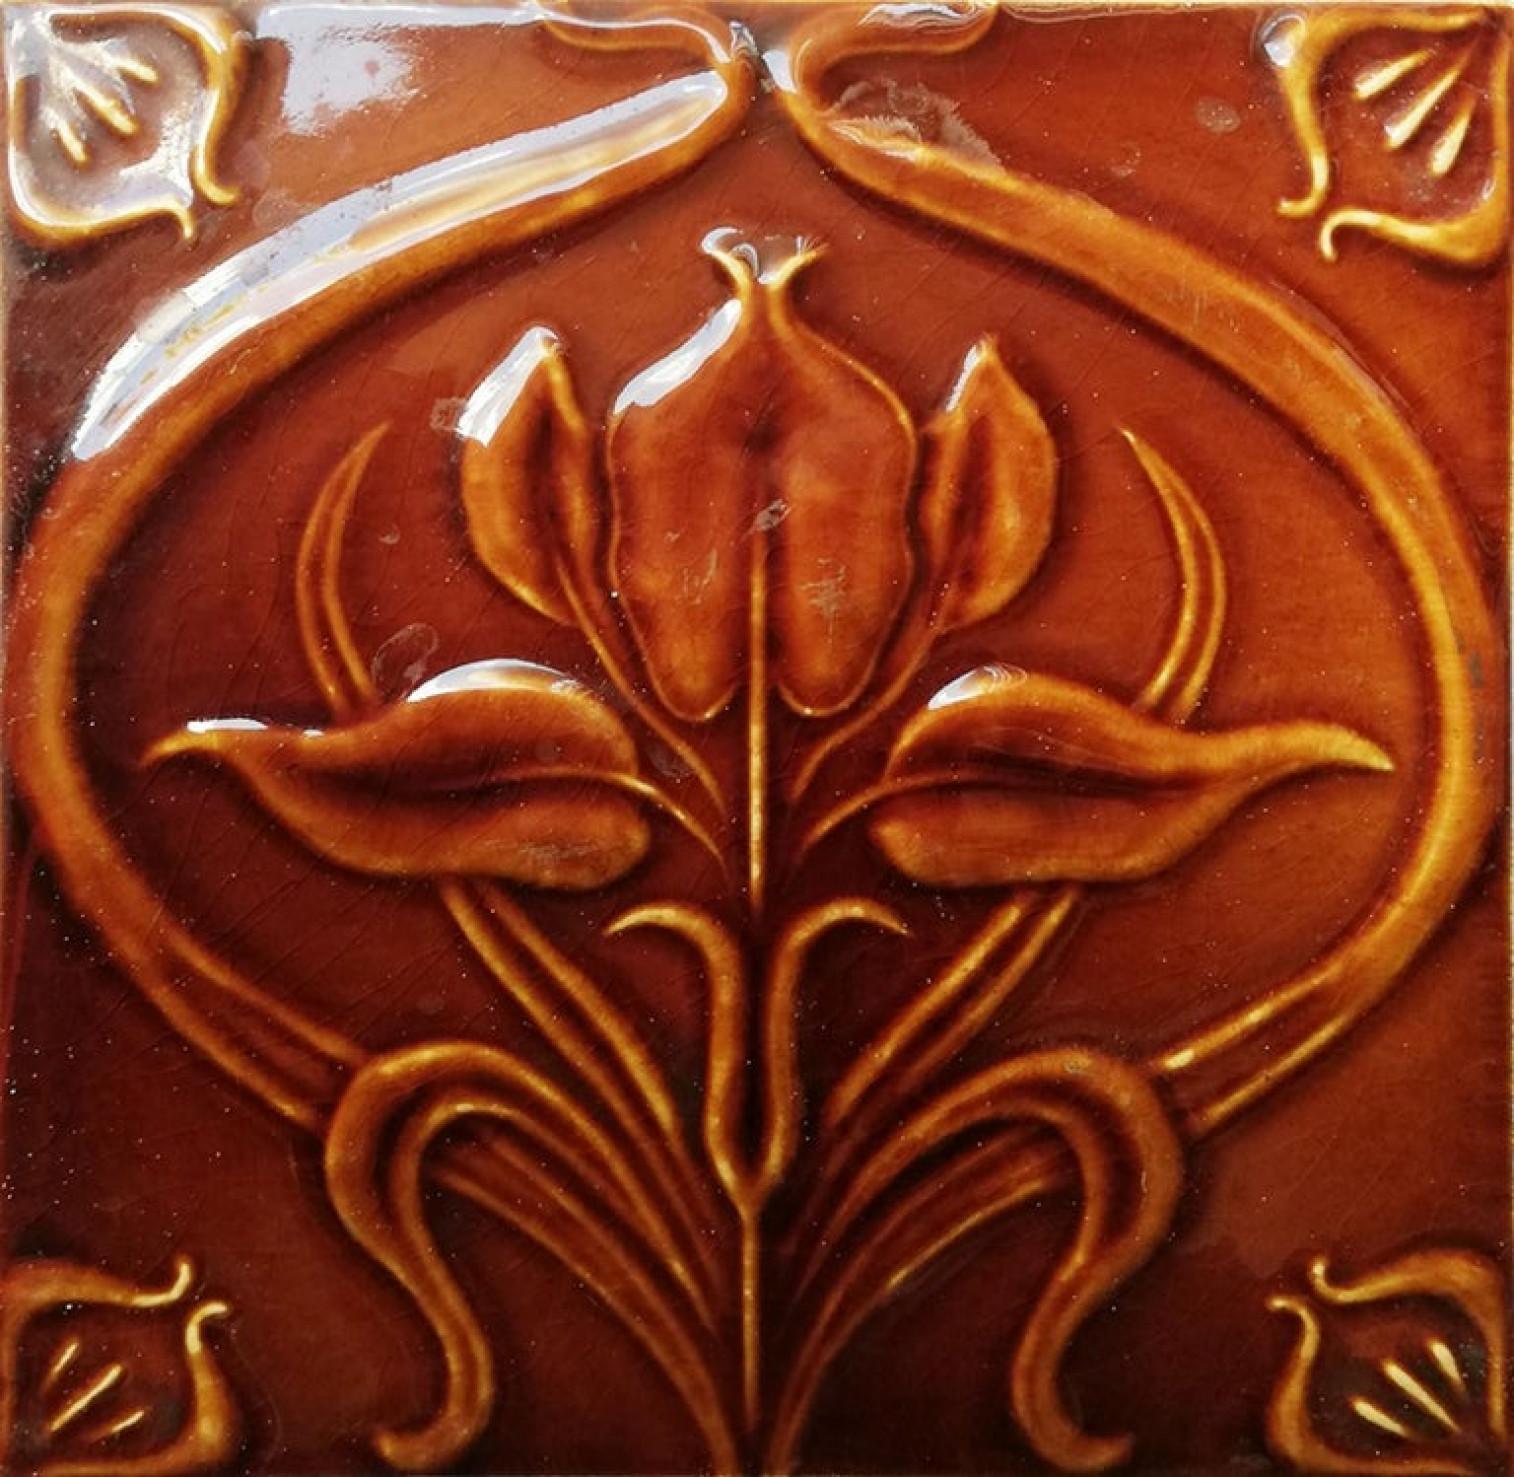 Beautiful Art Nouveau tiles, with an image of a flower in relief. The gorgeous red-brown color is glazed. Manufactured around 1930 by, Societé Morialmé, Belgium.
The dimensions per tile are 5.9 inch (15 cm) × 5.9 inch (15 cm).

Please note that the